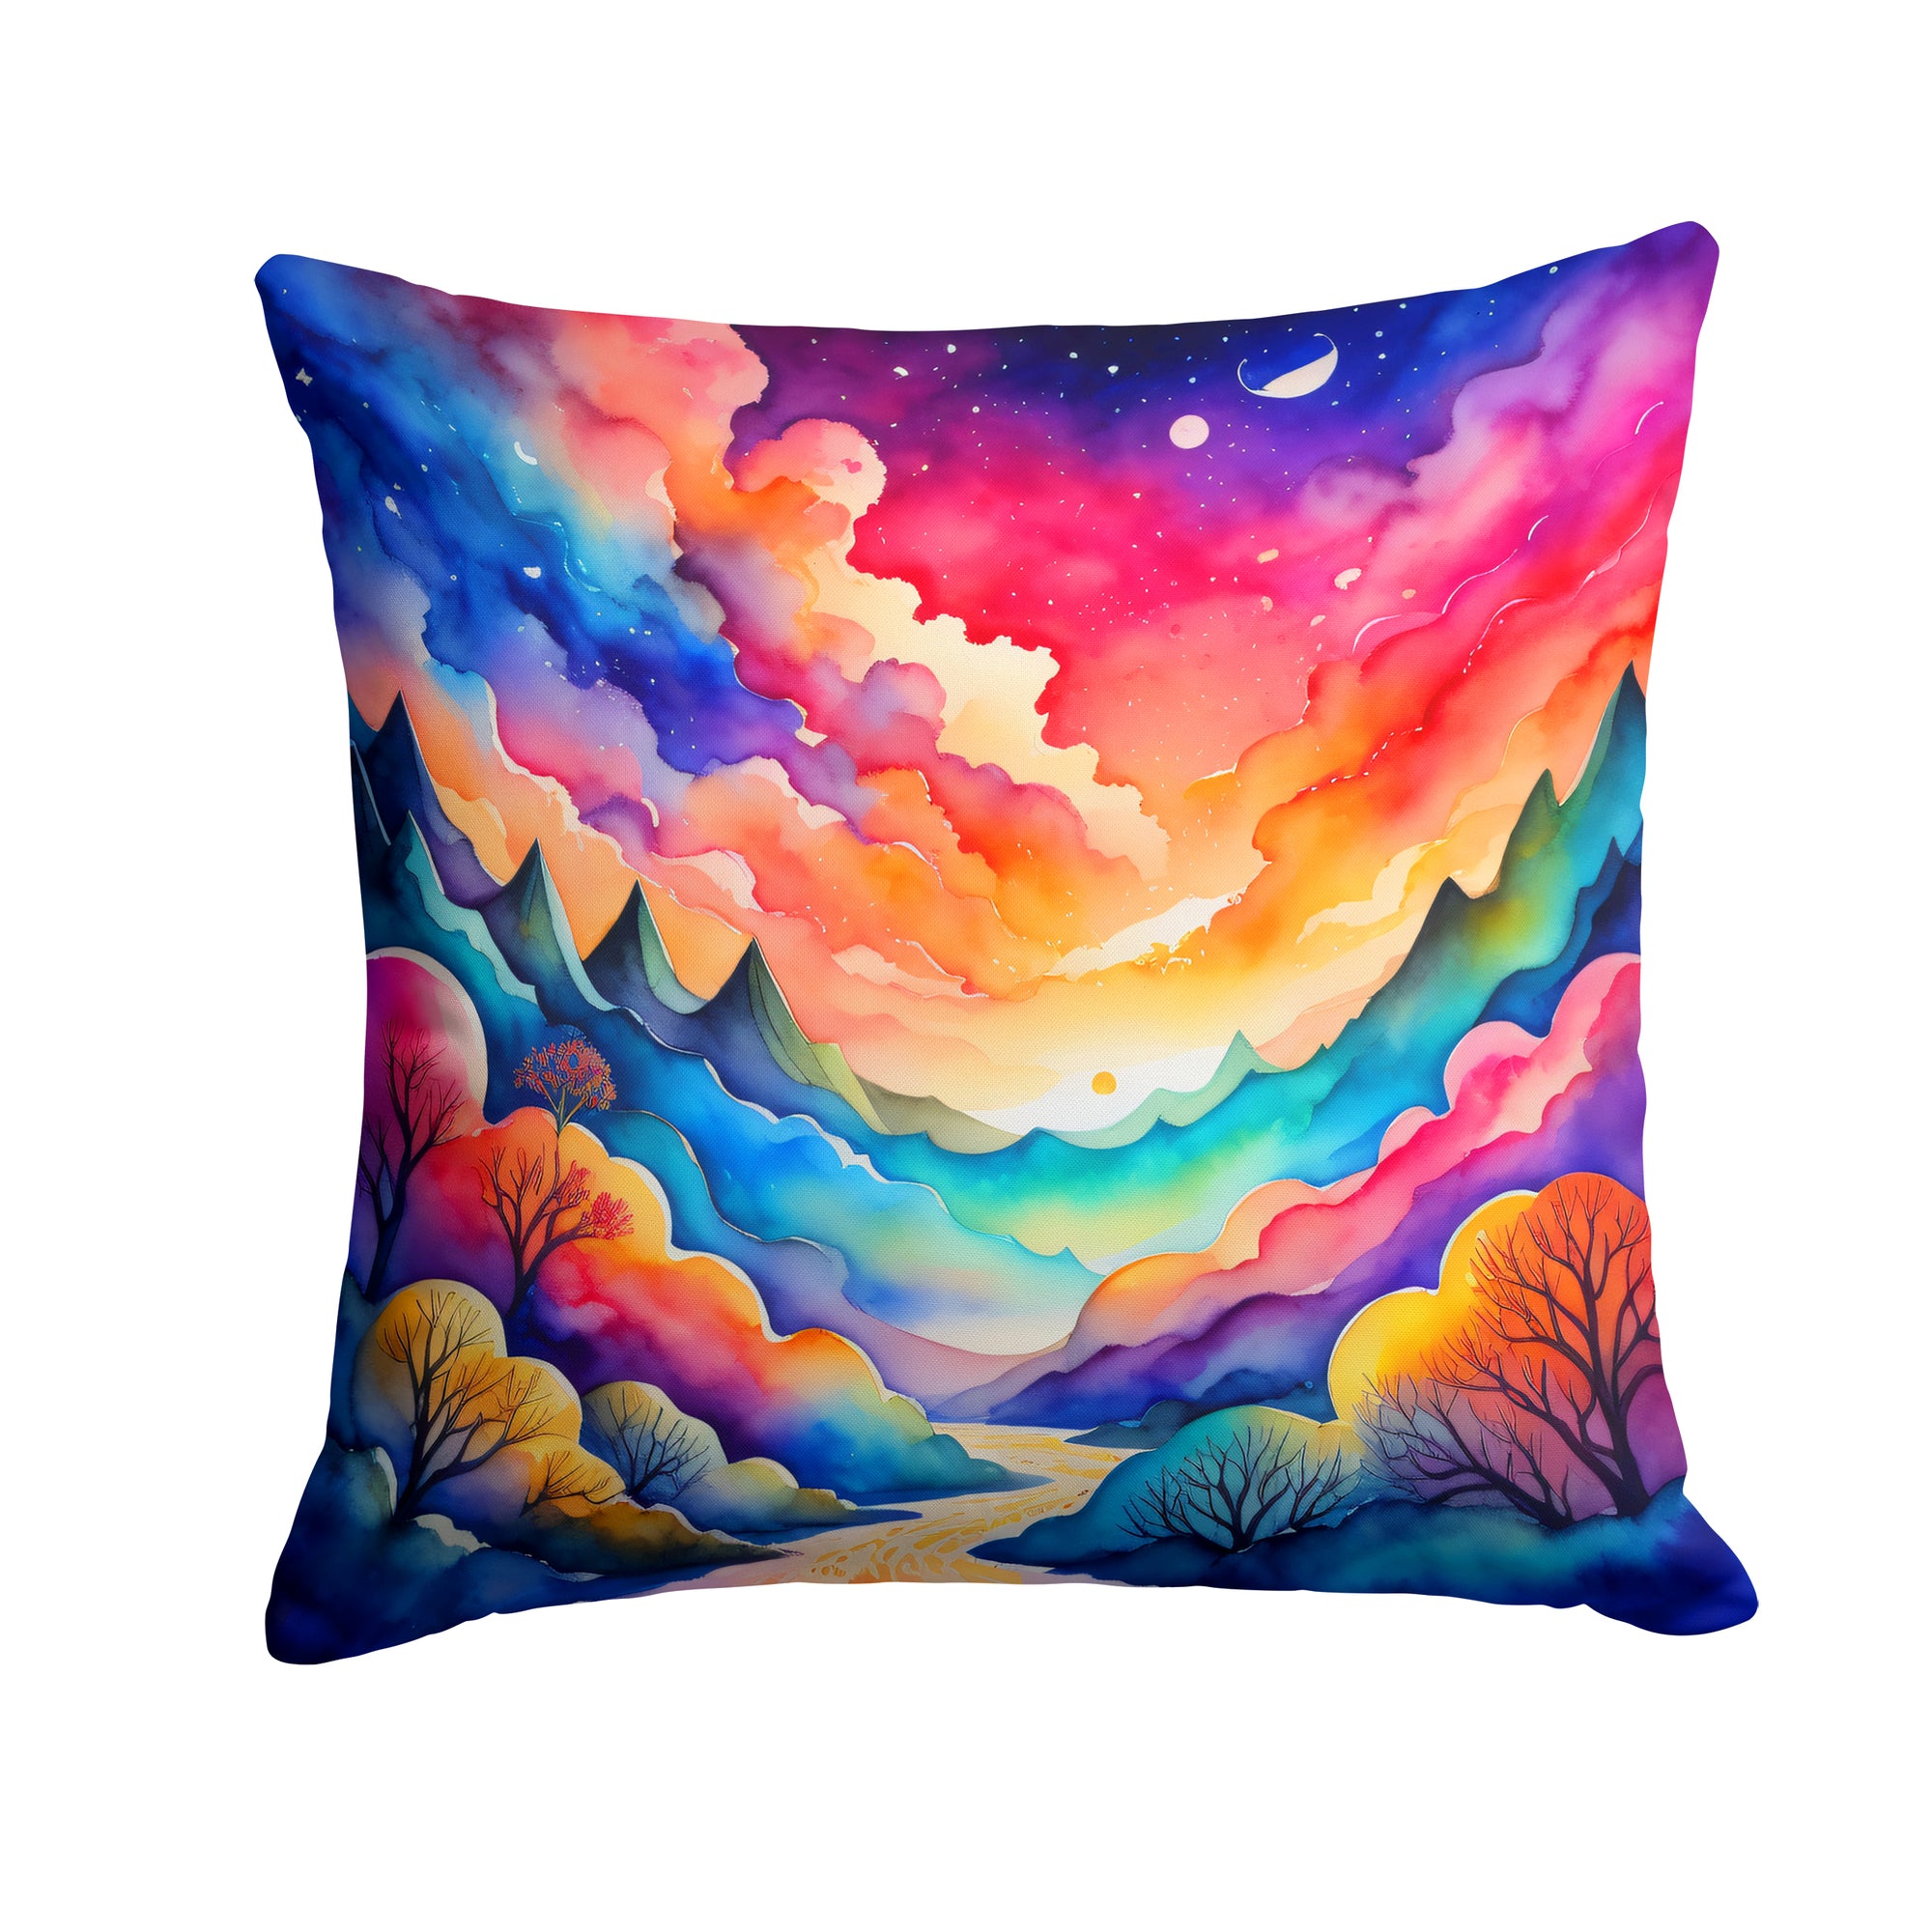 Buy this Colorful Amaranths Fabric Decorative Pillow